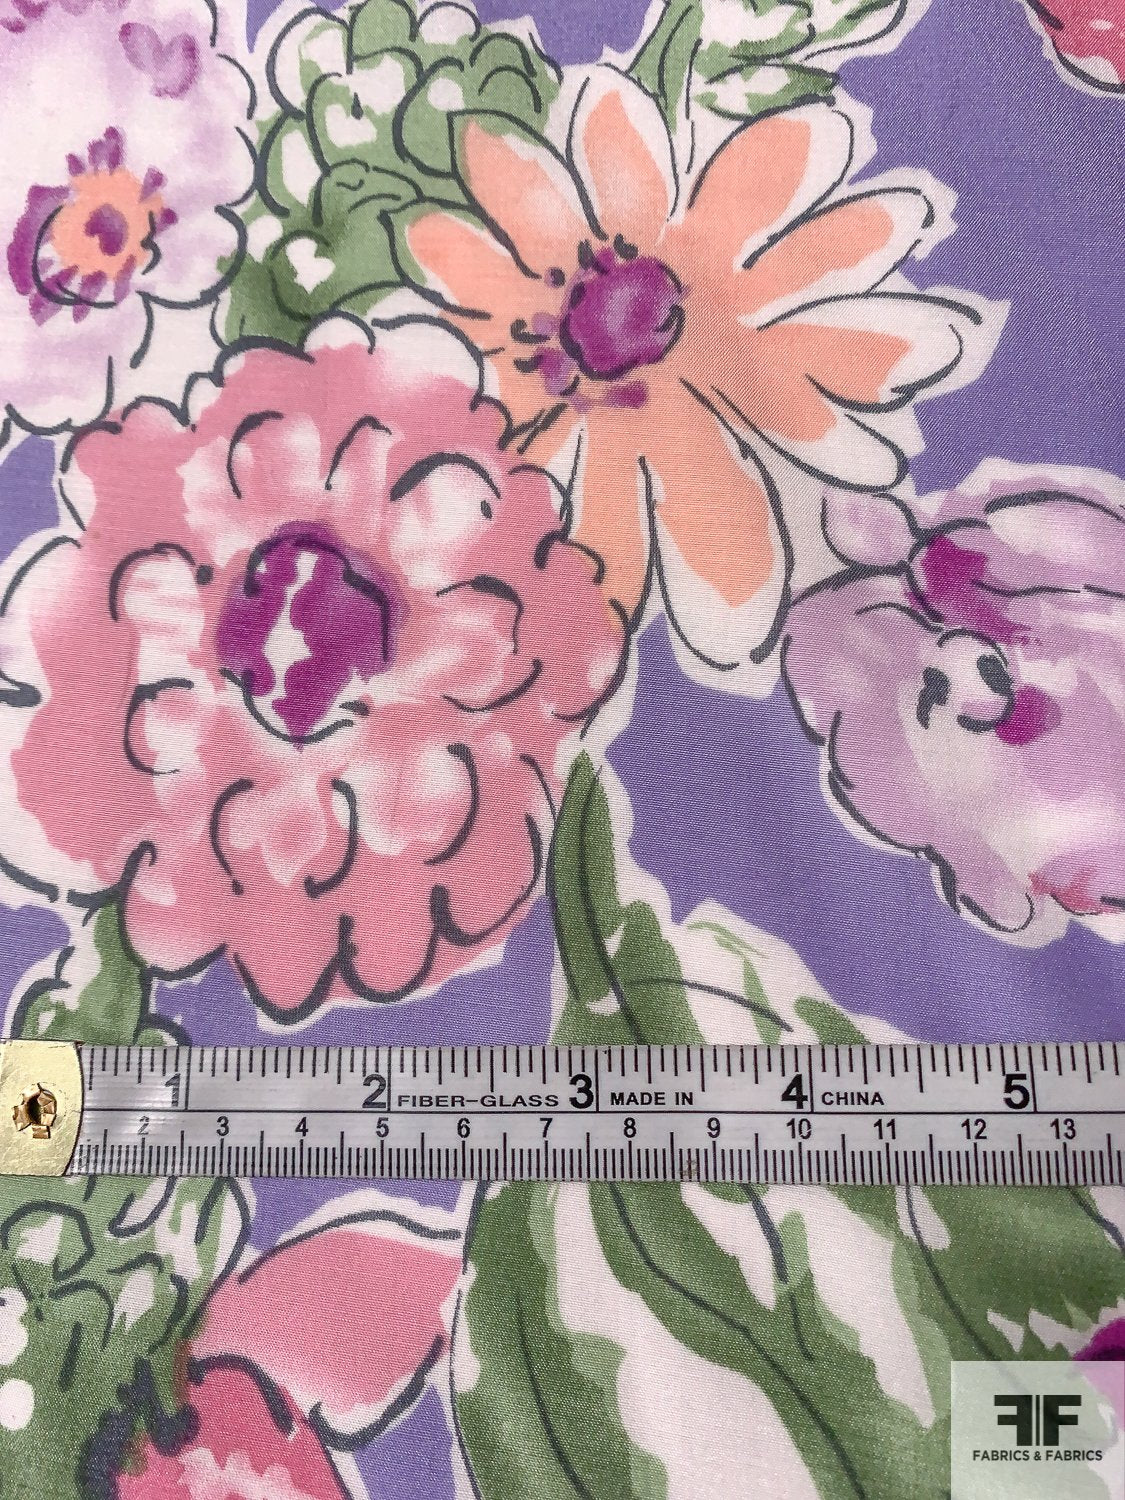 100% Cotton Fabric Pink Ditsy Floral on Green Floral Craft Fabric